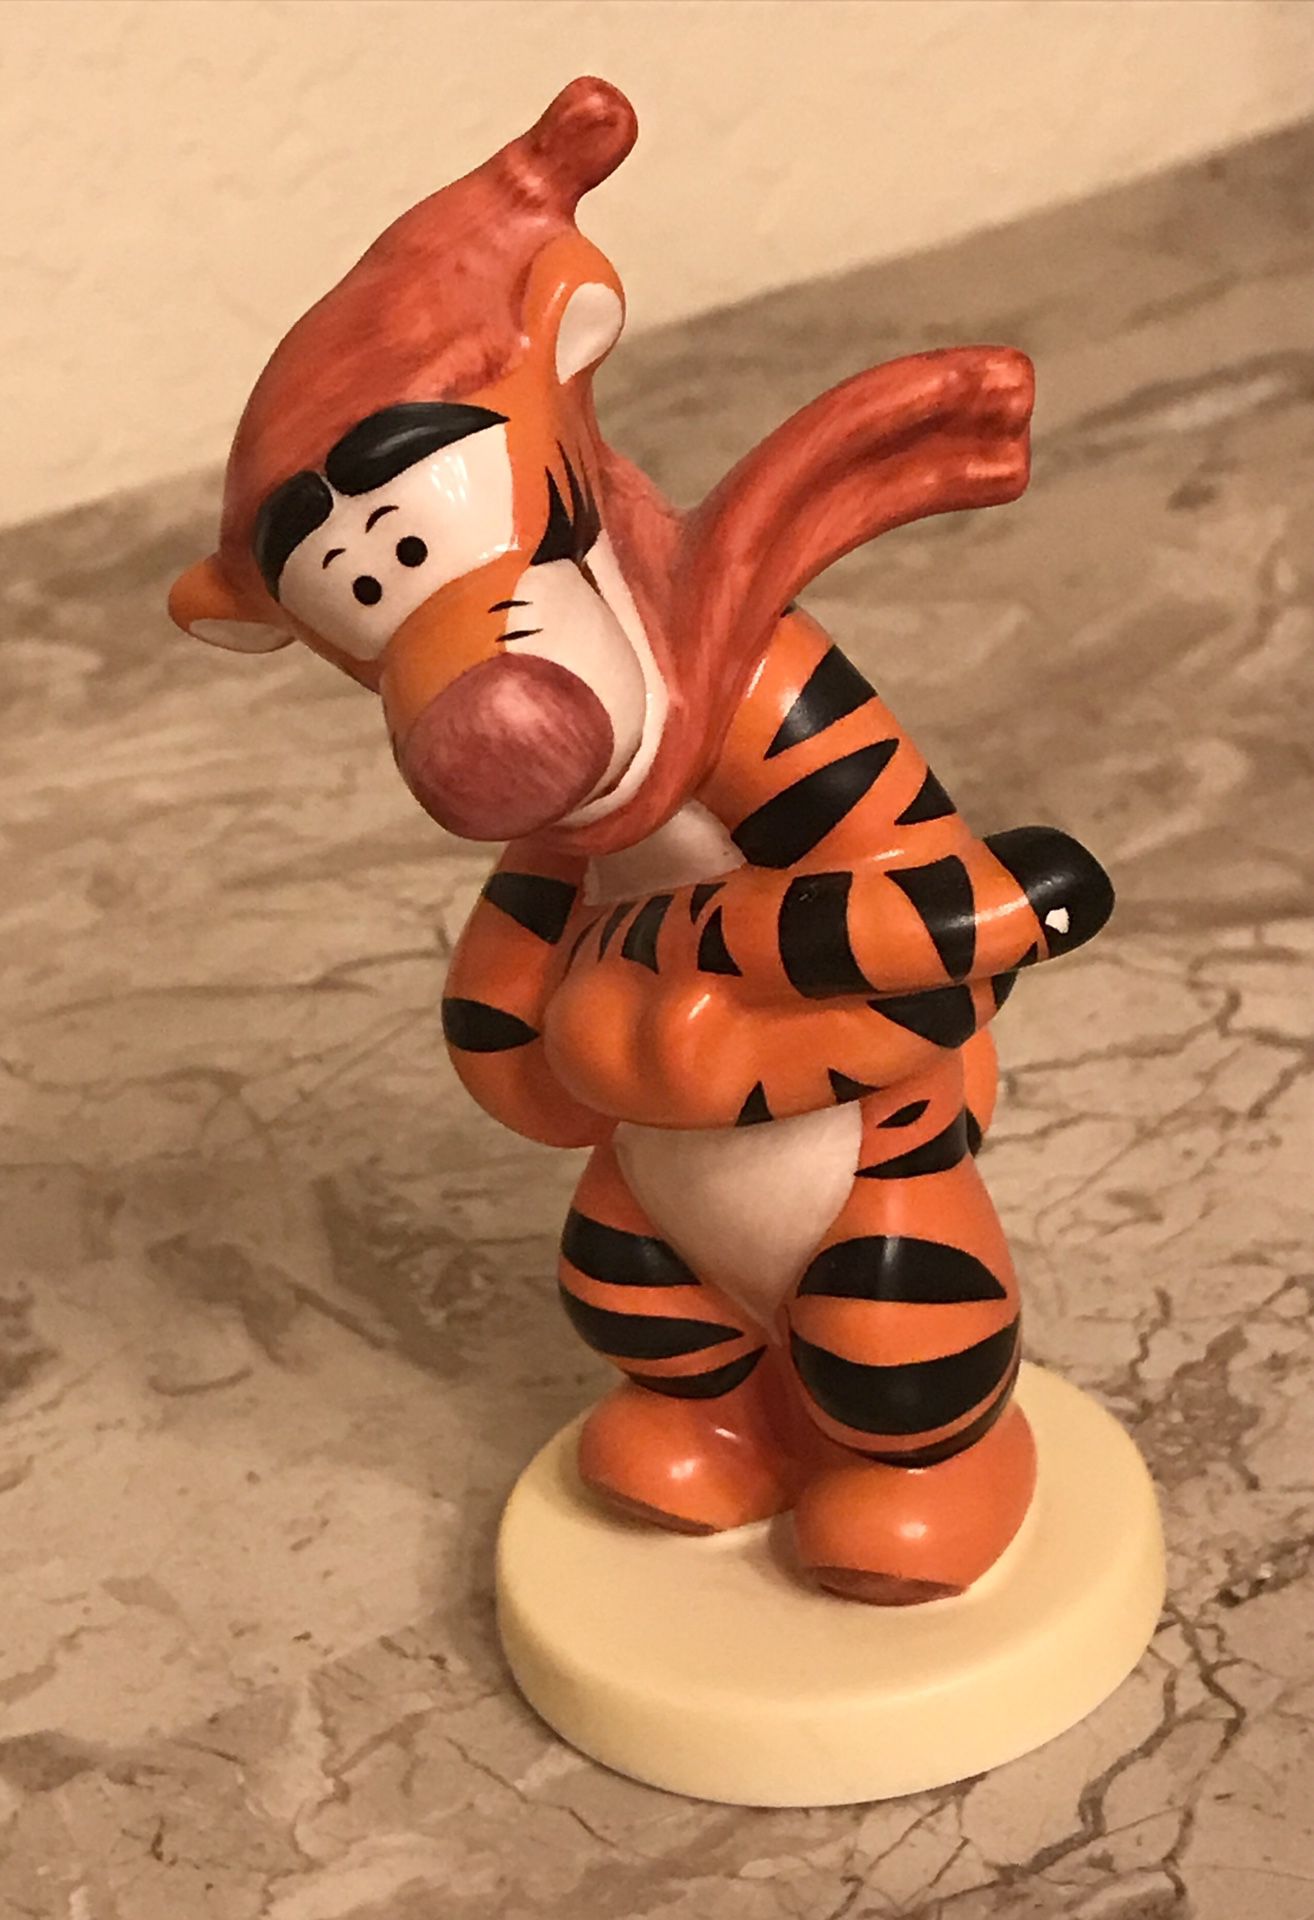 Rare Tigger Figurine by Goebel / Disney “March Winds” Hand Signed